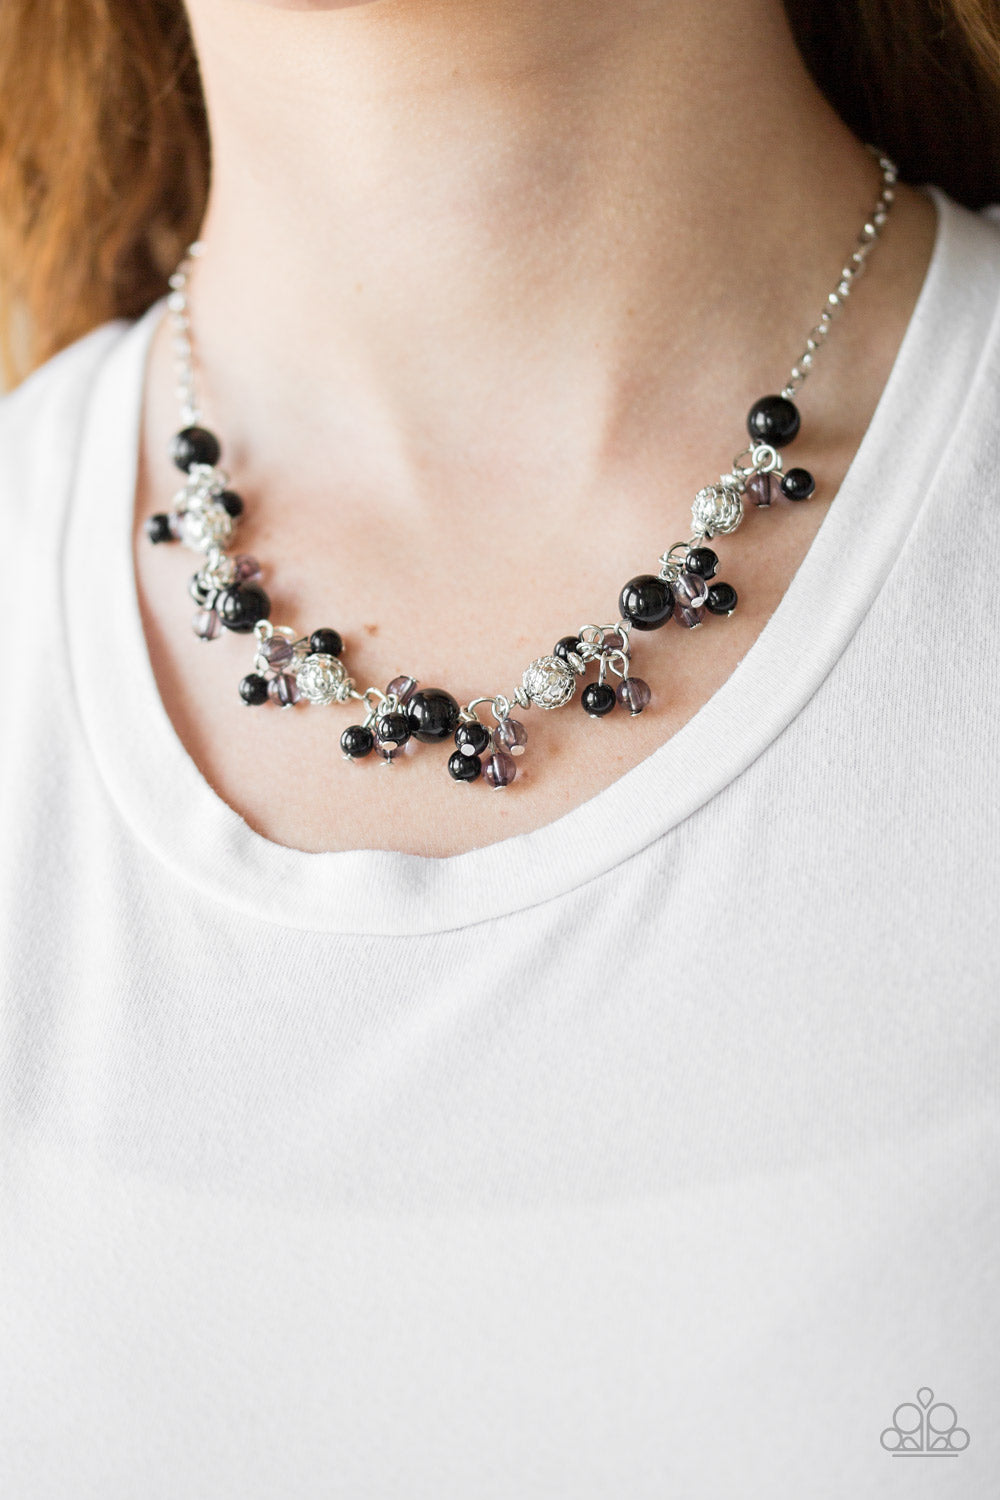 Weekday Wedding- Black and Silver Necklace- Paparazzi Accessories